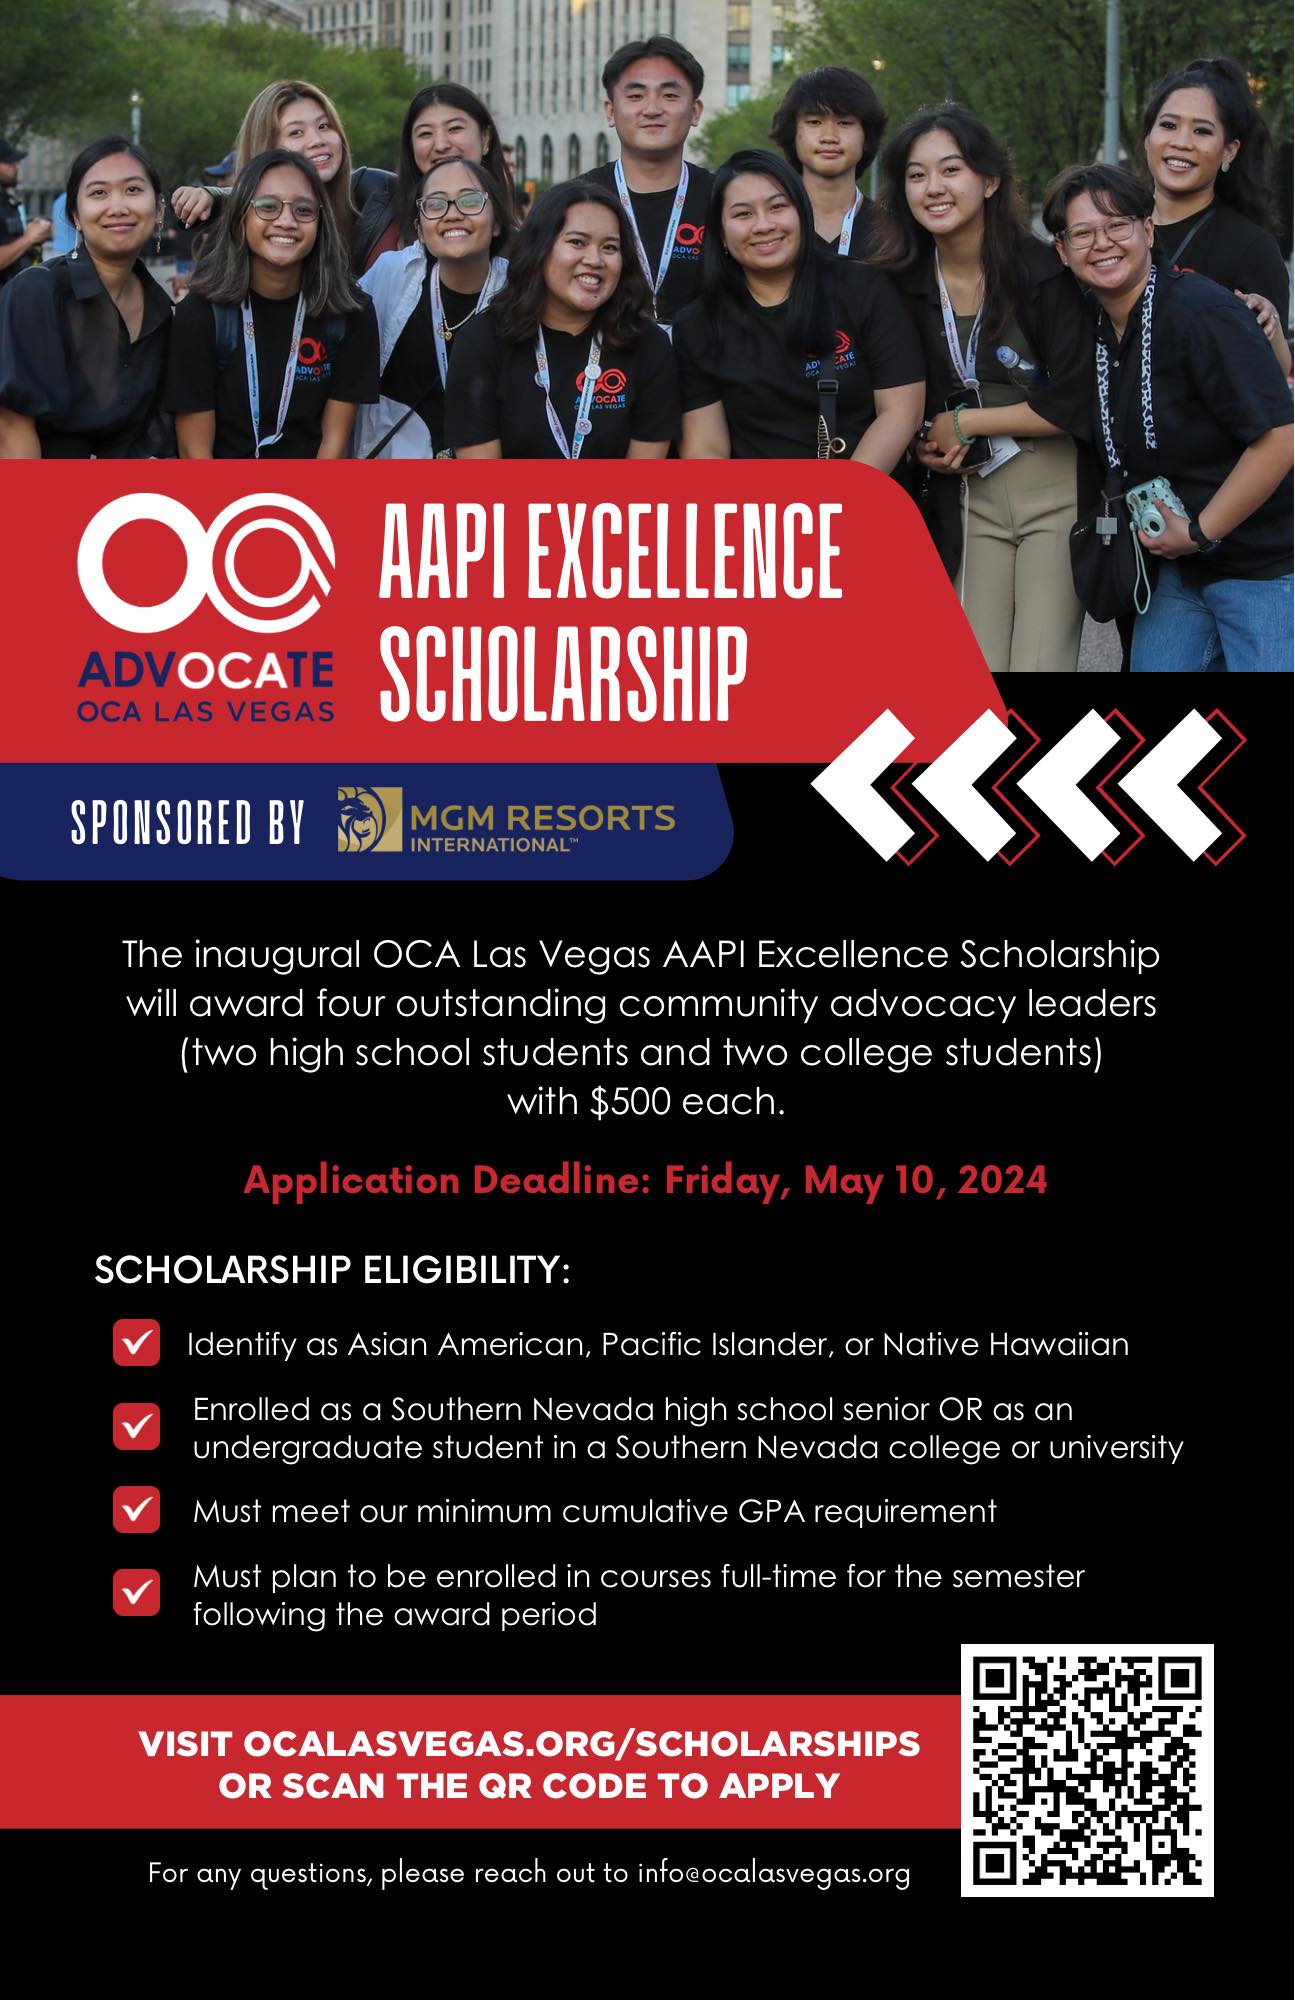 OCA Las Vegas Asian American and Pacific Islander (AAPI) Excellence Scholarship sponsored by MGM Resorts International